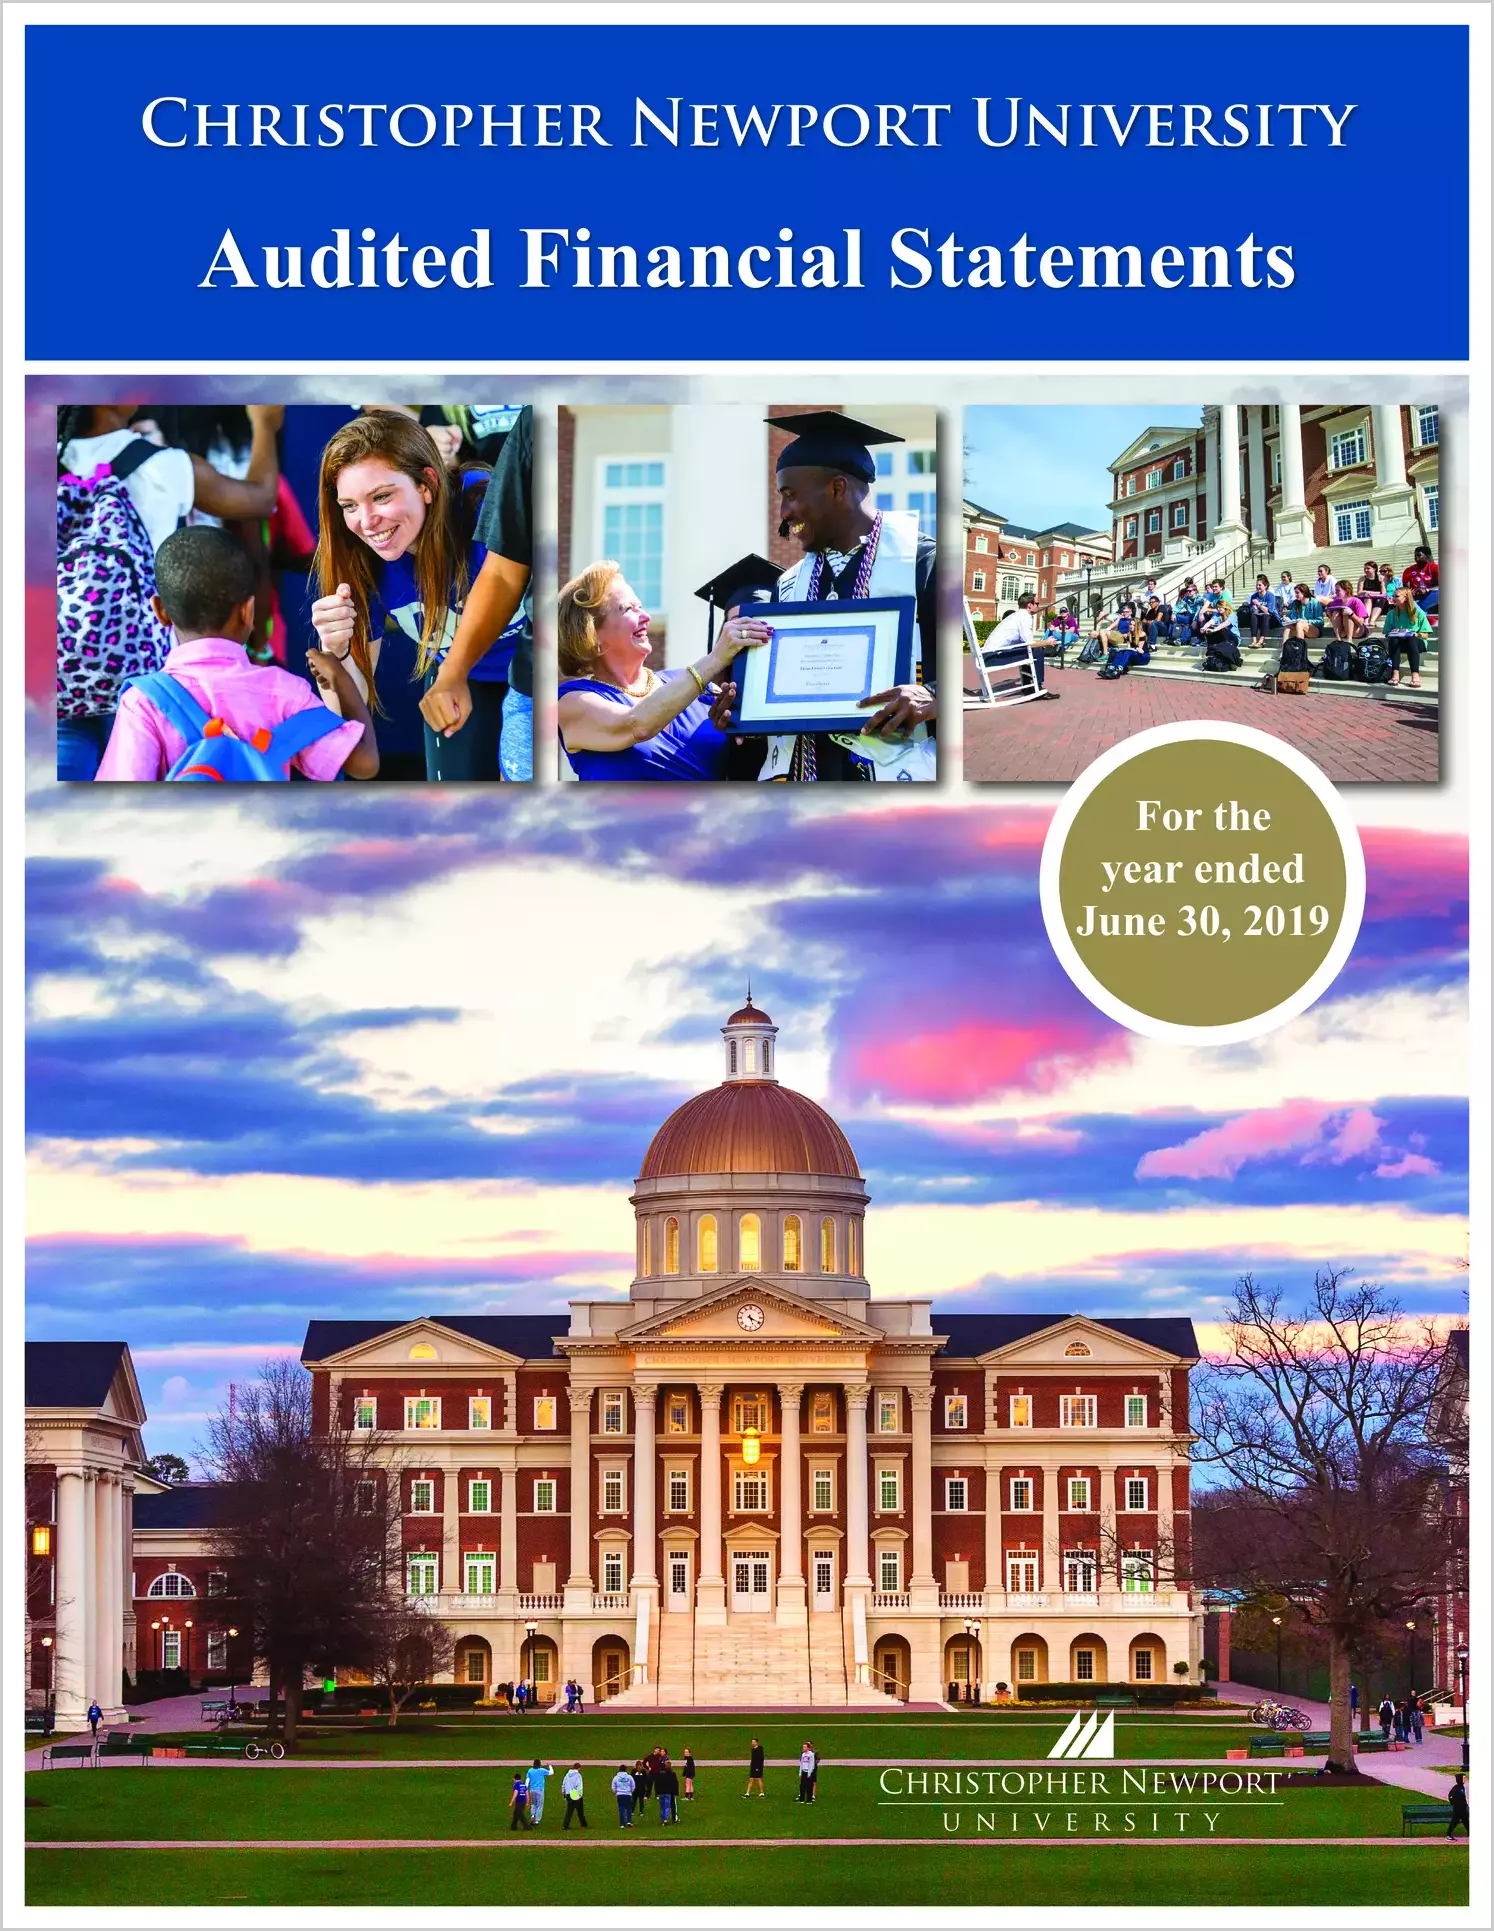 Christopher Newport University Financial Statements for the year ended June 30, 2019